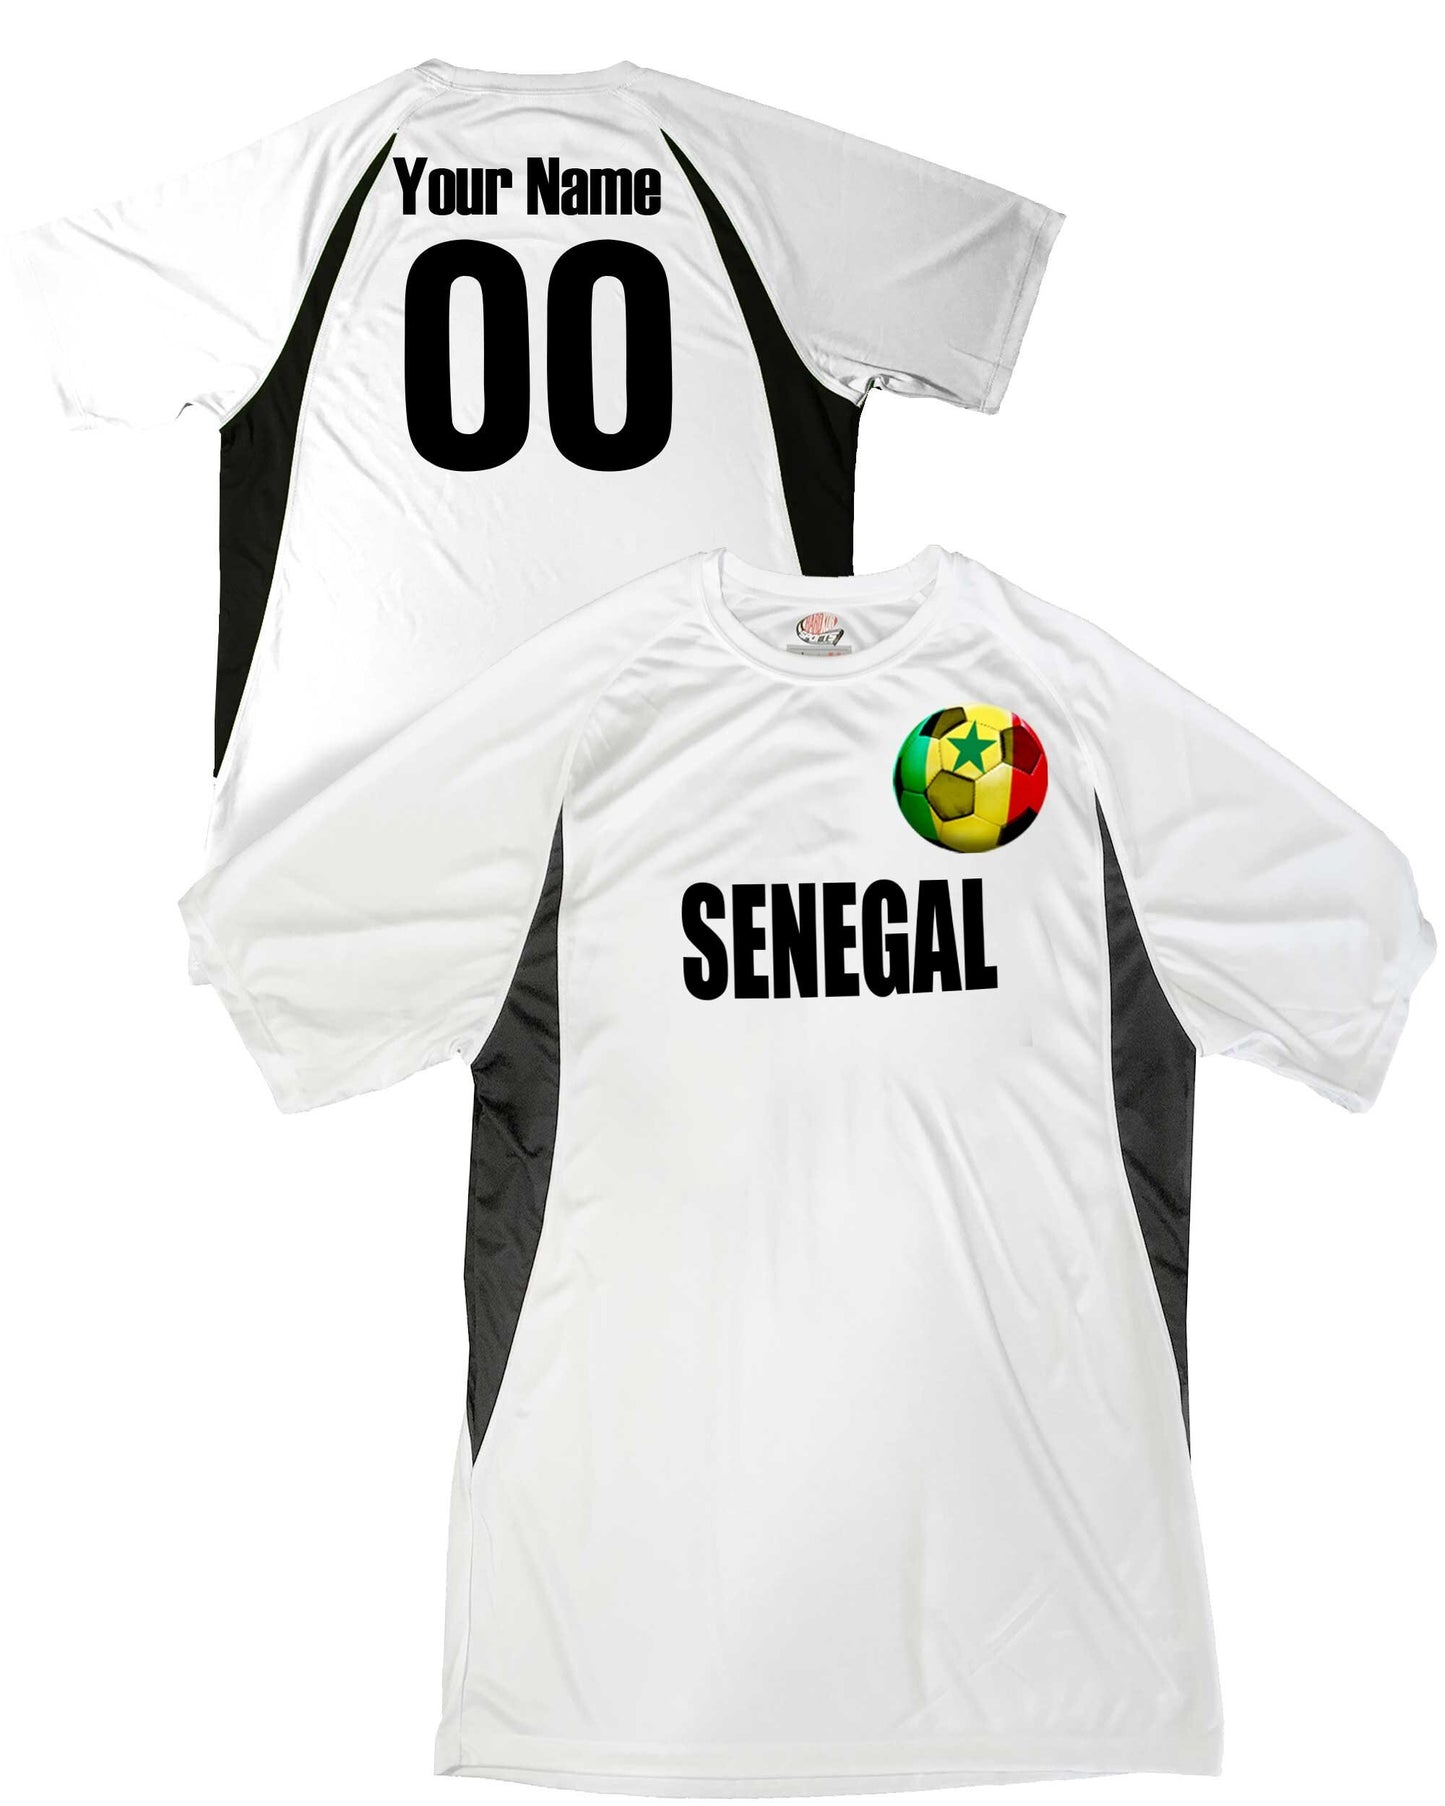 Senegal Custom Futbol Jersey with Senegalese Flag Superimposed over a Soccer Ball Design, Personalized with your Names and Numbers